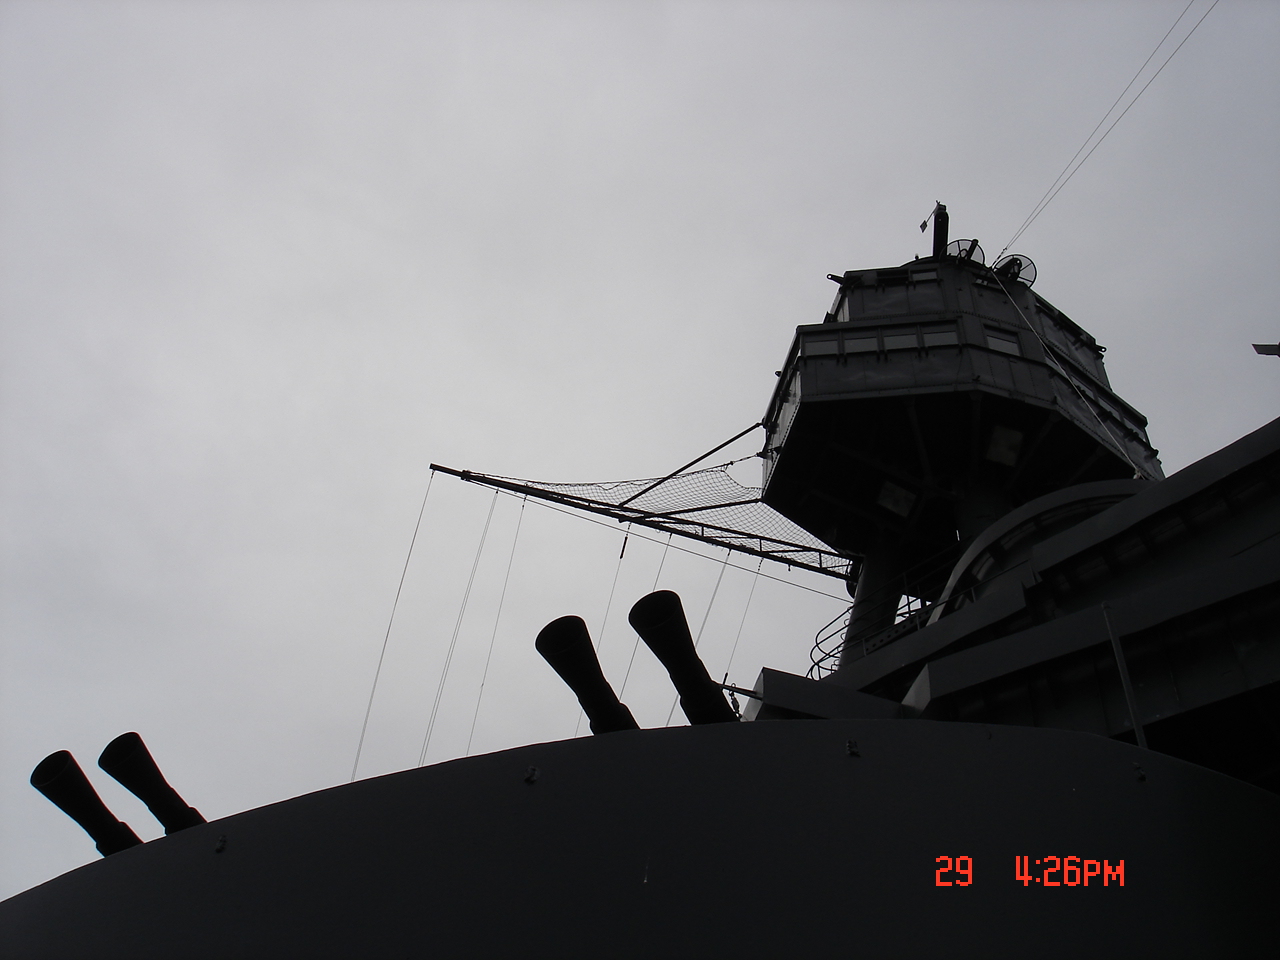 View up superstructure of USS Texas, 2007; note the muzzle of 40mm anti-aircraft guns, the foremast, and the spotters' stations